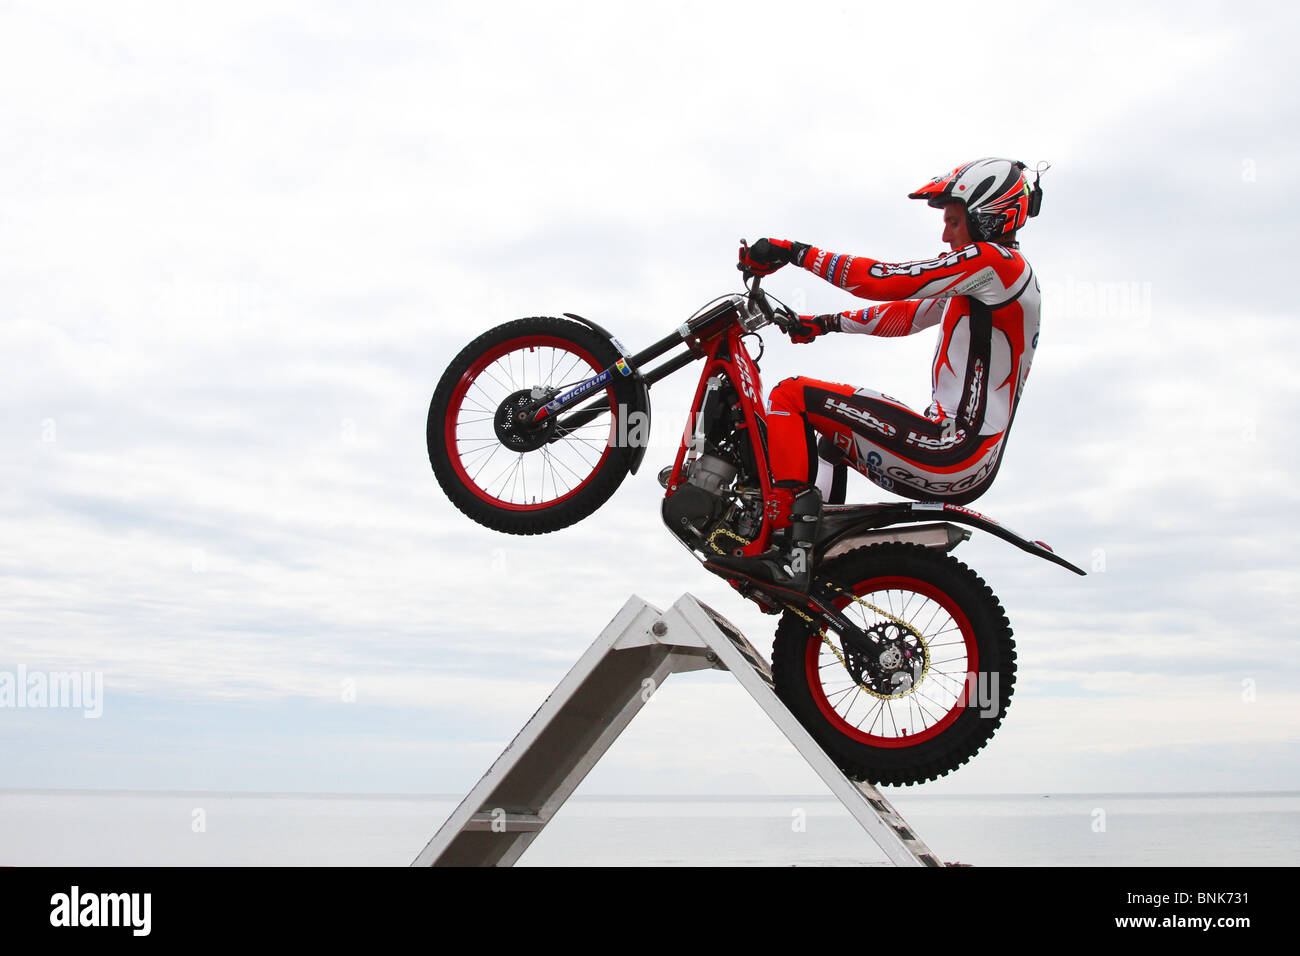 steve-colley-motorcycle-stunt-rider-at-arbroath-seafront-spectacular-BNK731.jpg (1300×956)